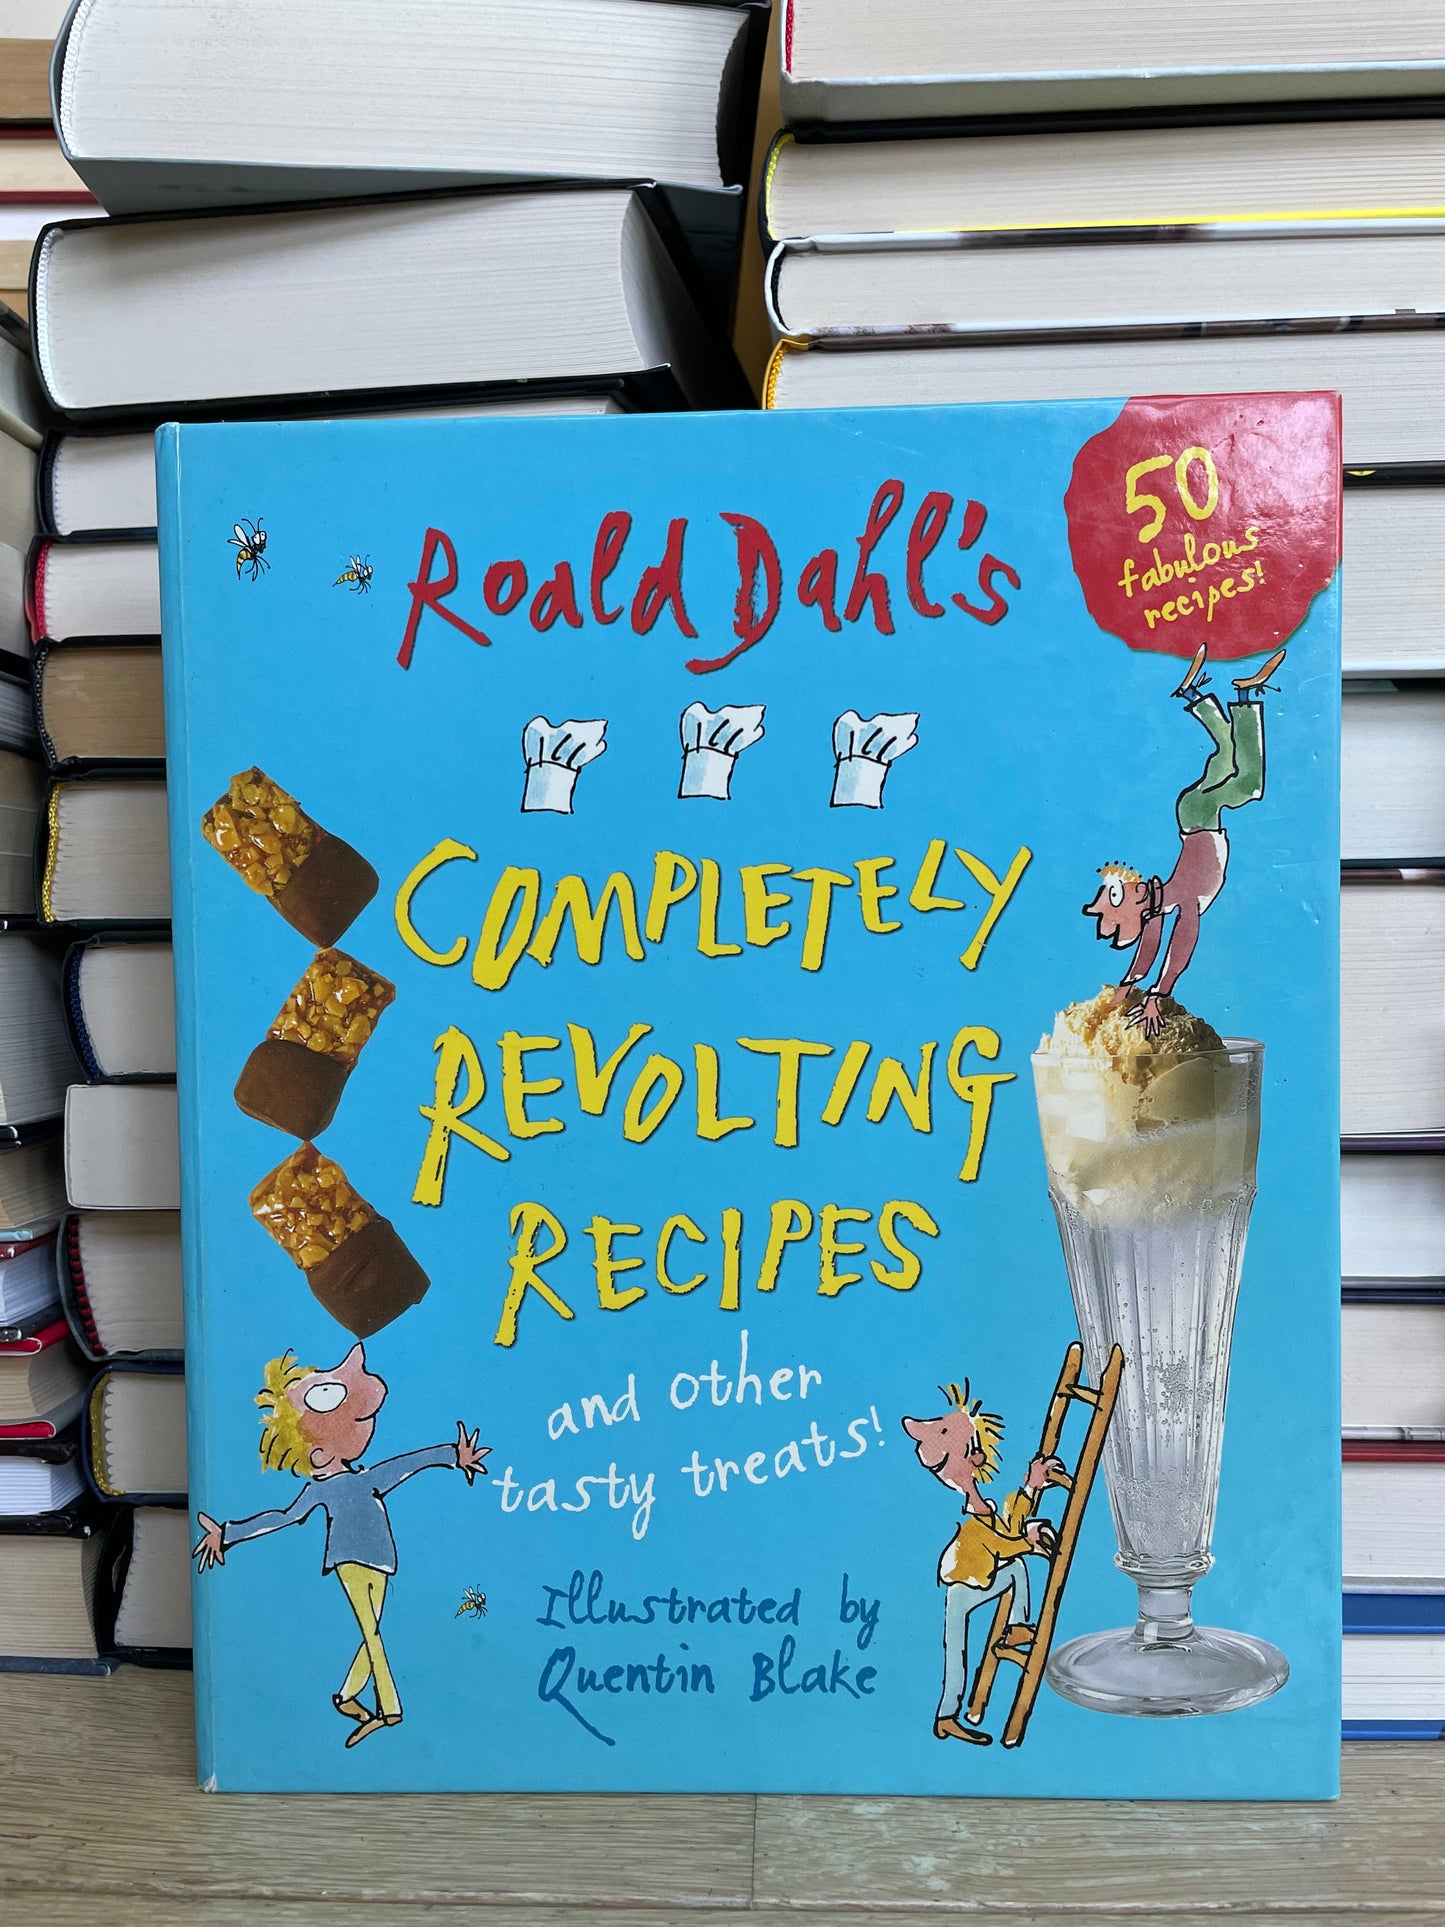 Roald Dahl's Completely Revolting Recipes and Other Tasty Treats